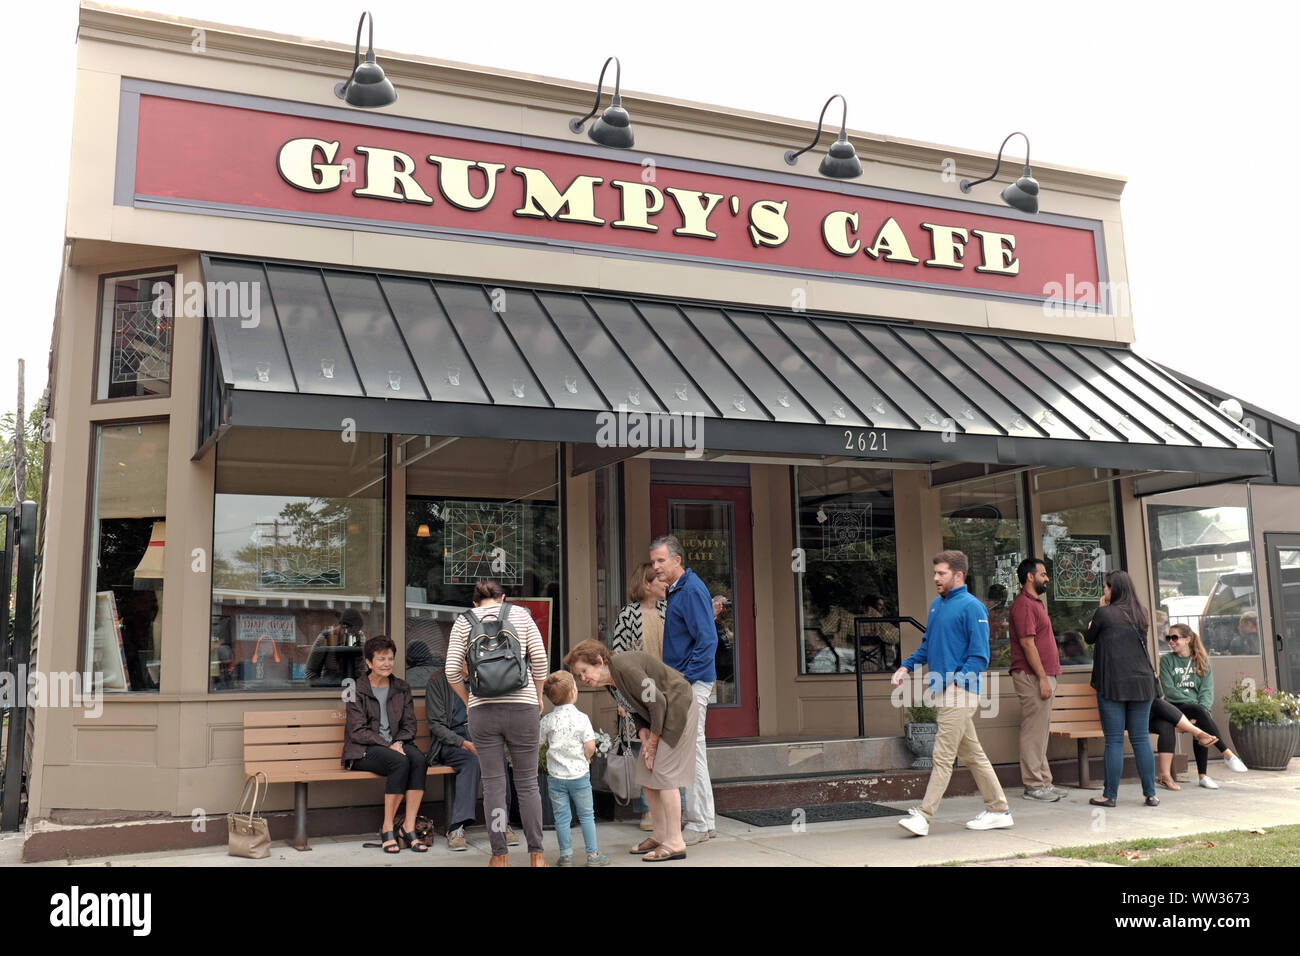 Grumpy's Cafe is a popular diner, known for its brunch, in the hipster neighborhood of Tremont in Cleveland, Ohio, USA. Stock Photo